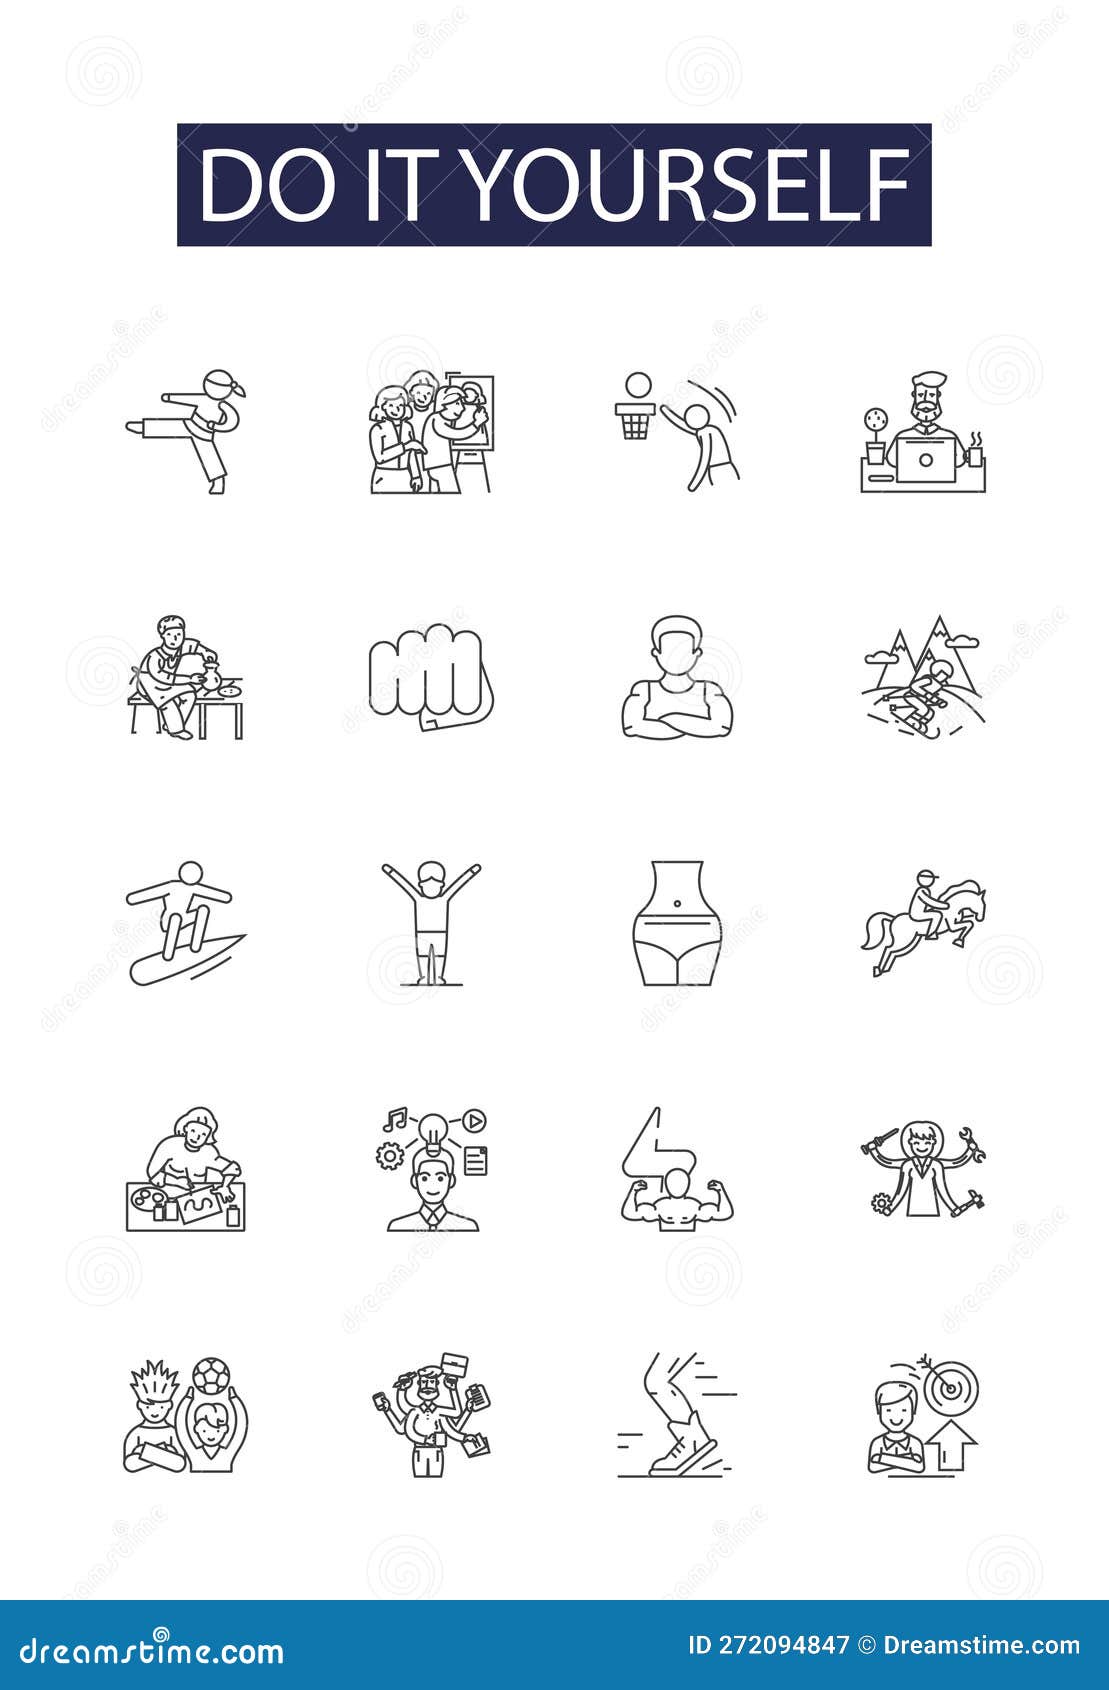 do it yourself line  icons and signs. self-help, autonomy, construct, craft, fabricate, improvise, make, mend